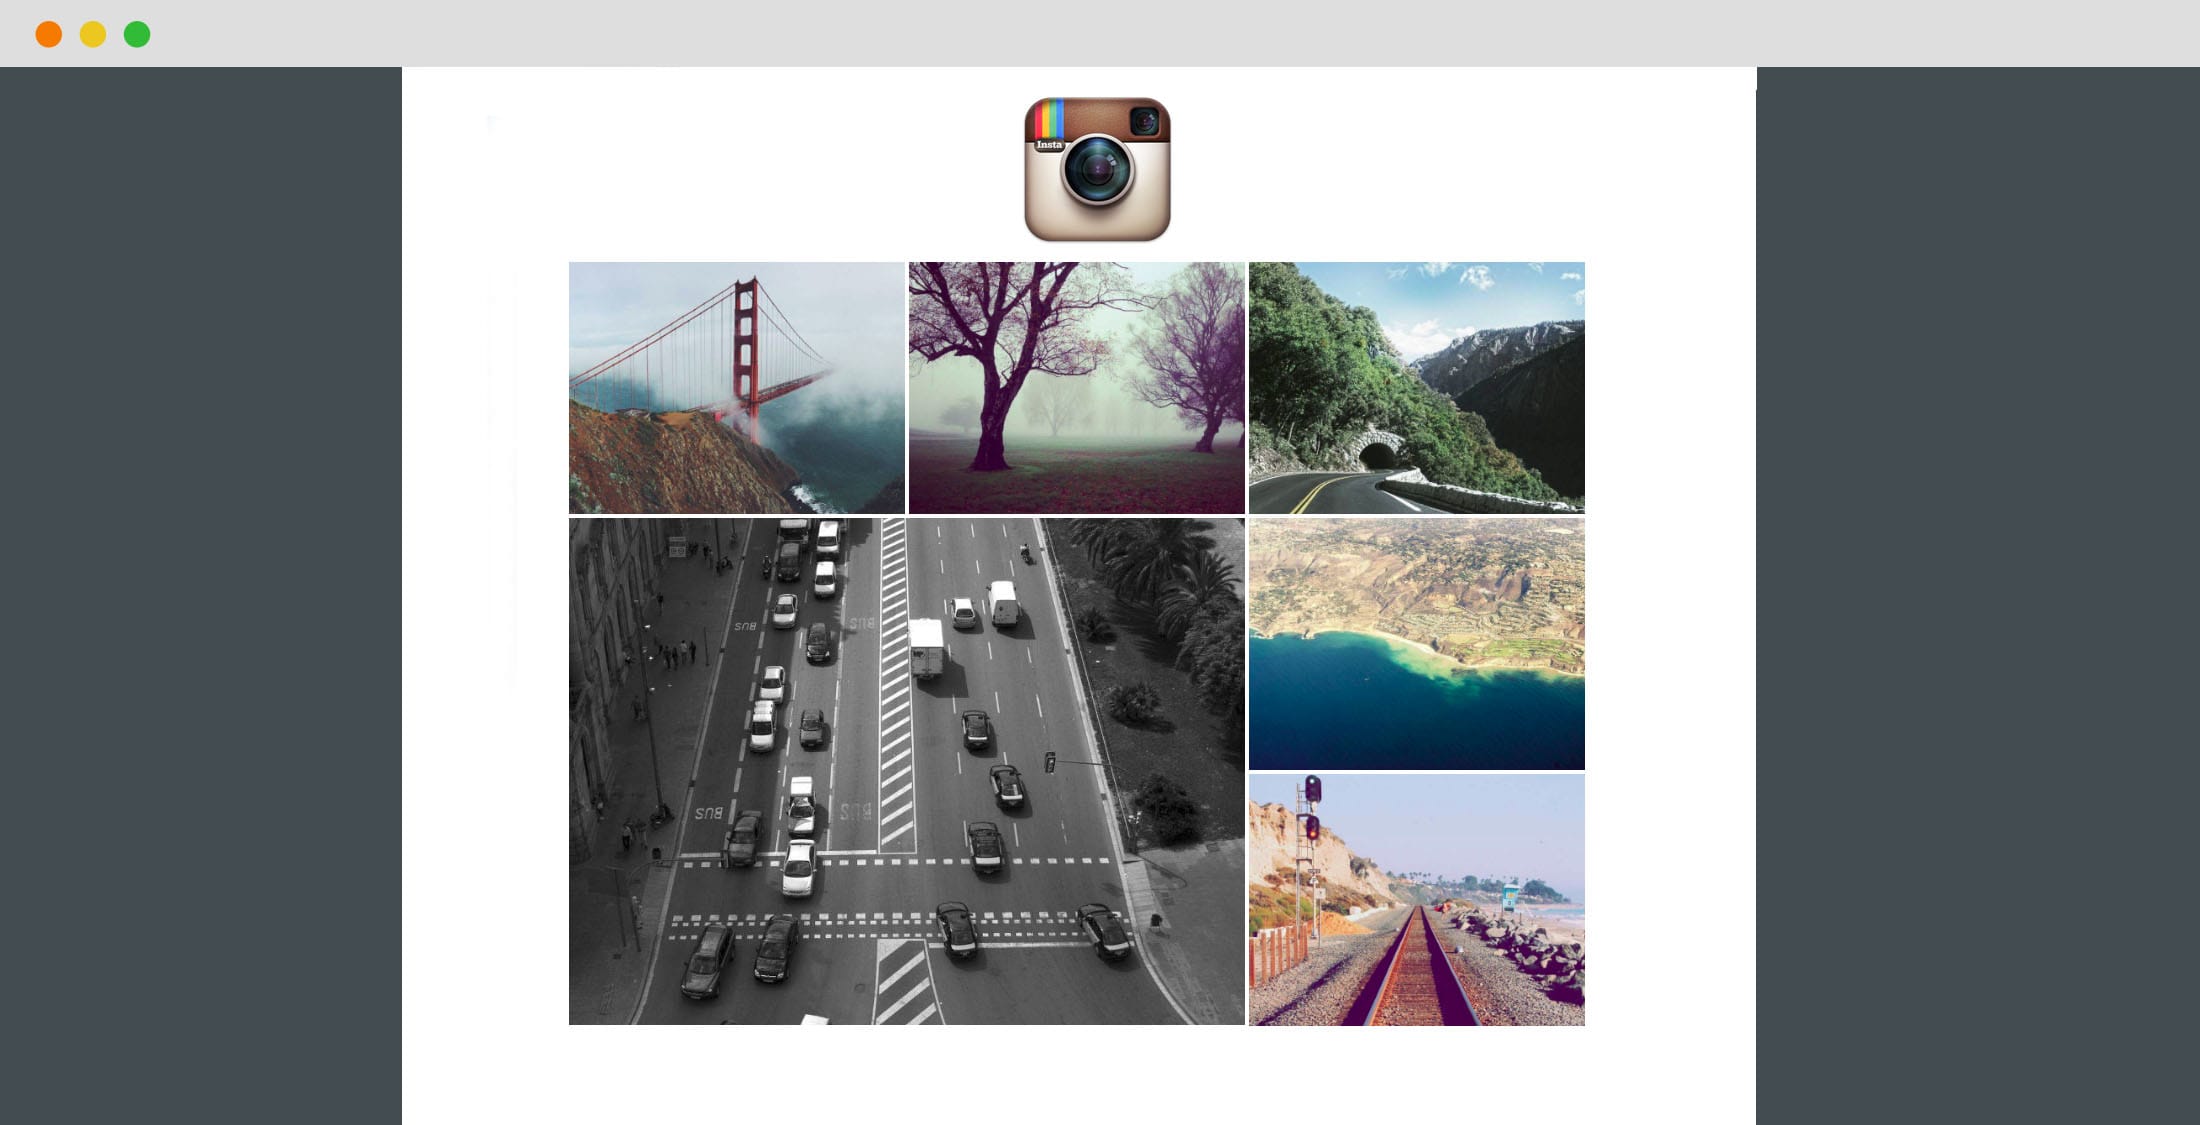 Instagram Feed: Building Gallery with Real-time data via Instagram API